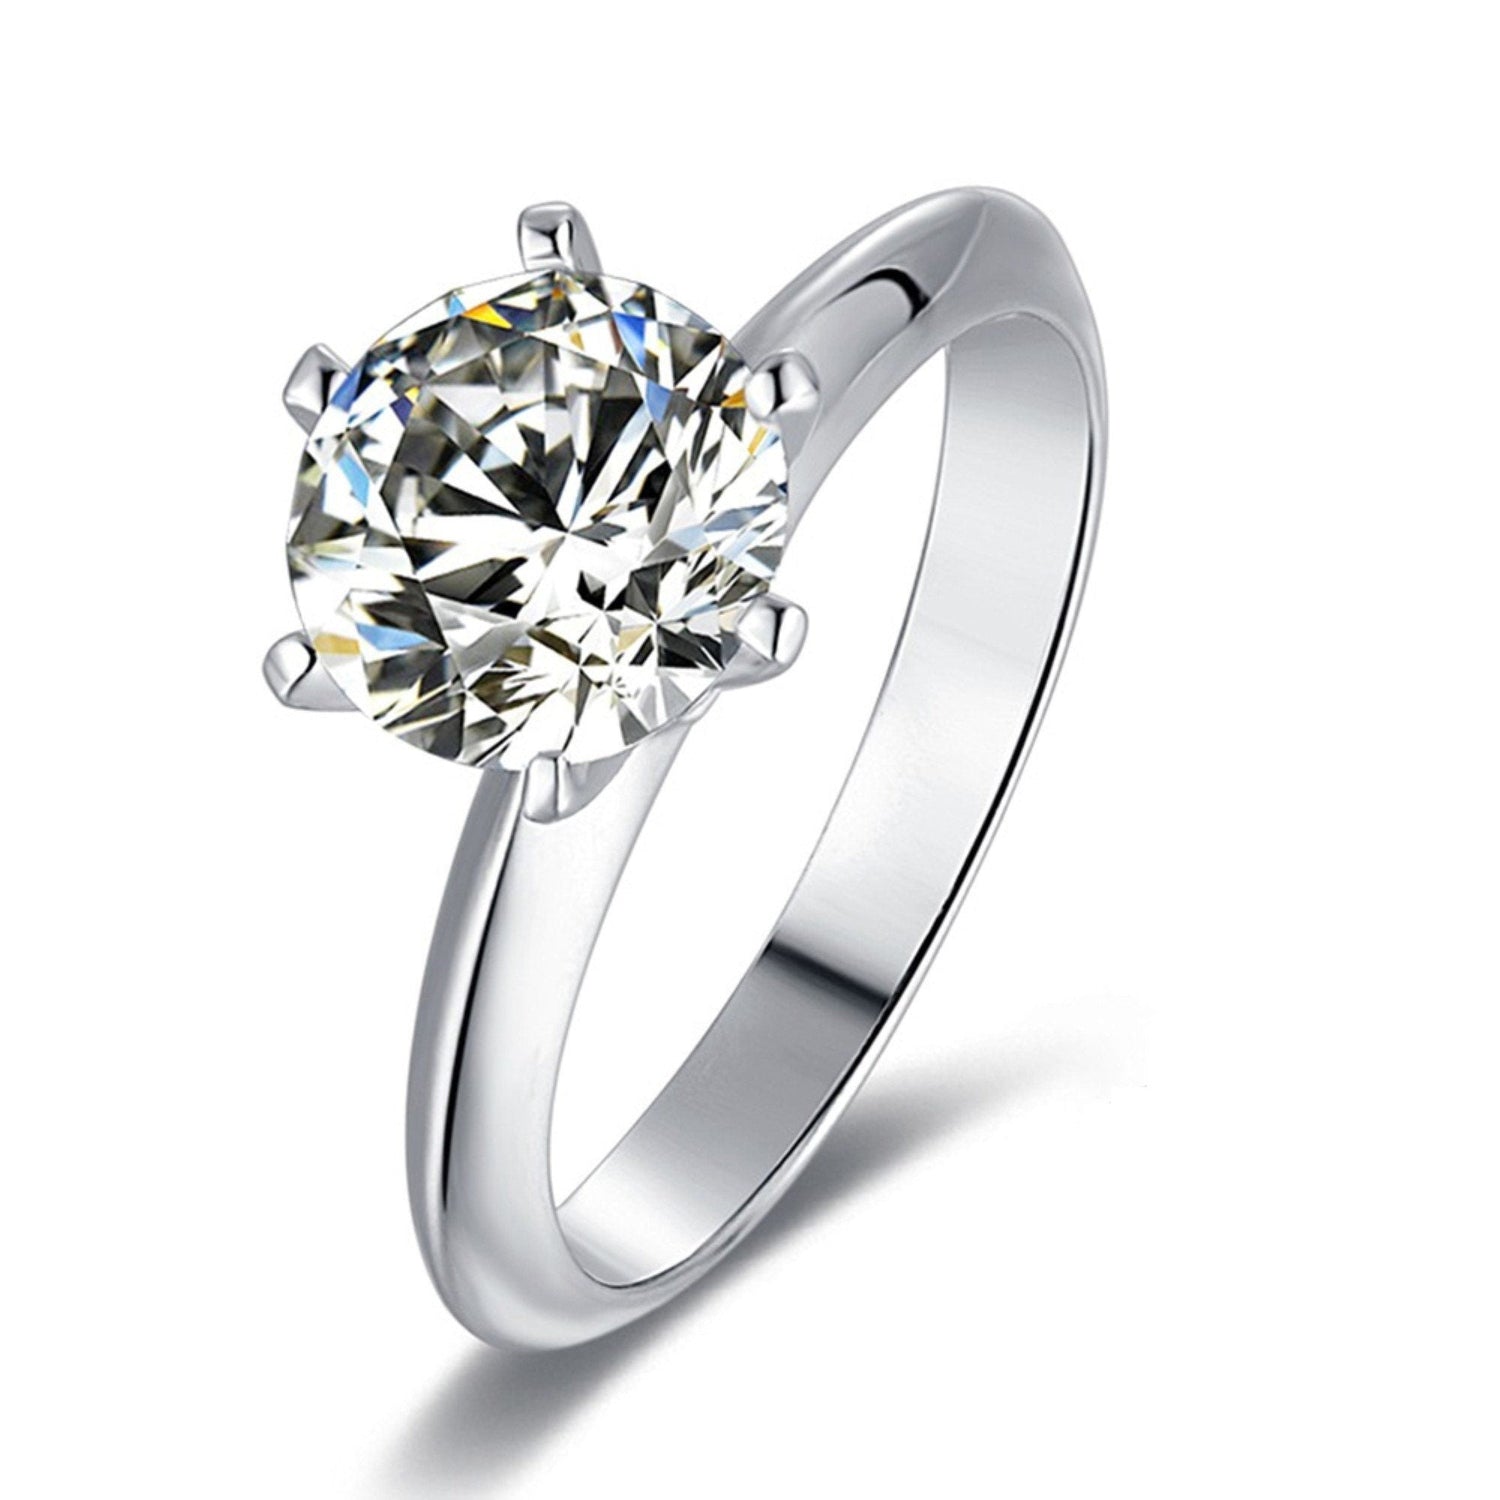 Moissanite Ring with GRA Certificate, 925 Sterling Silver, 18k White Gold Plating - Wedding Fine Jewelry